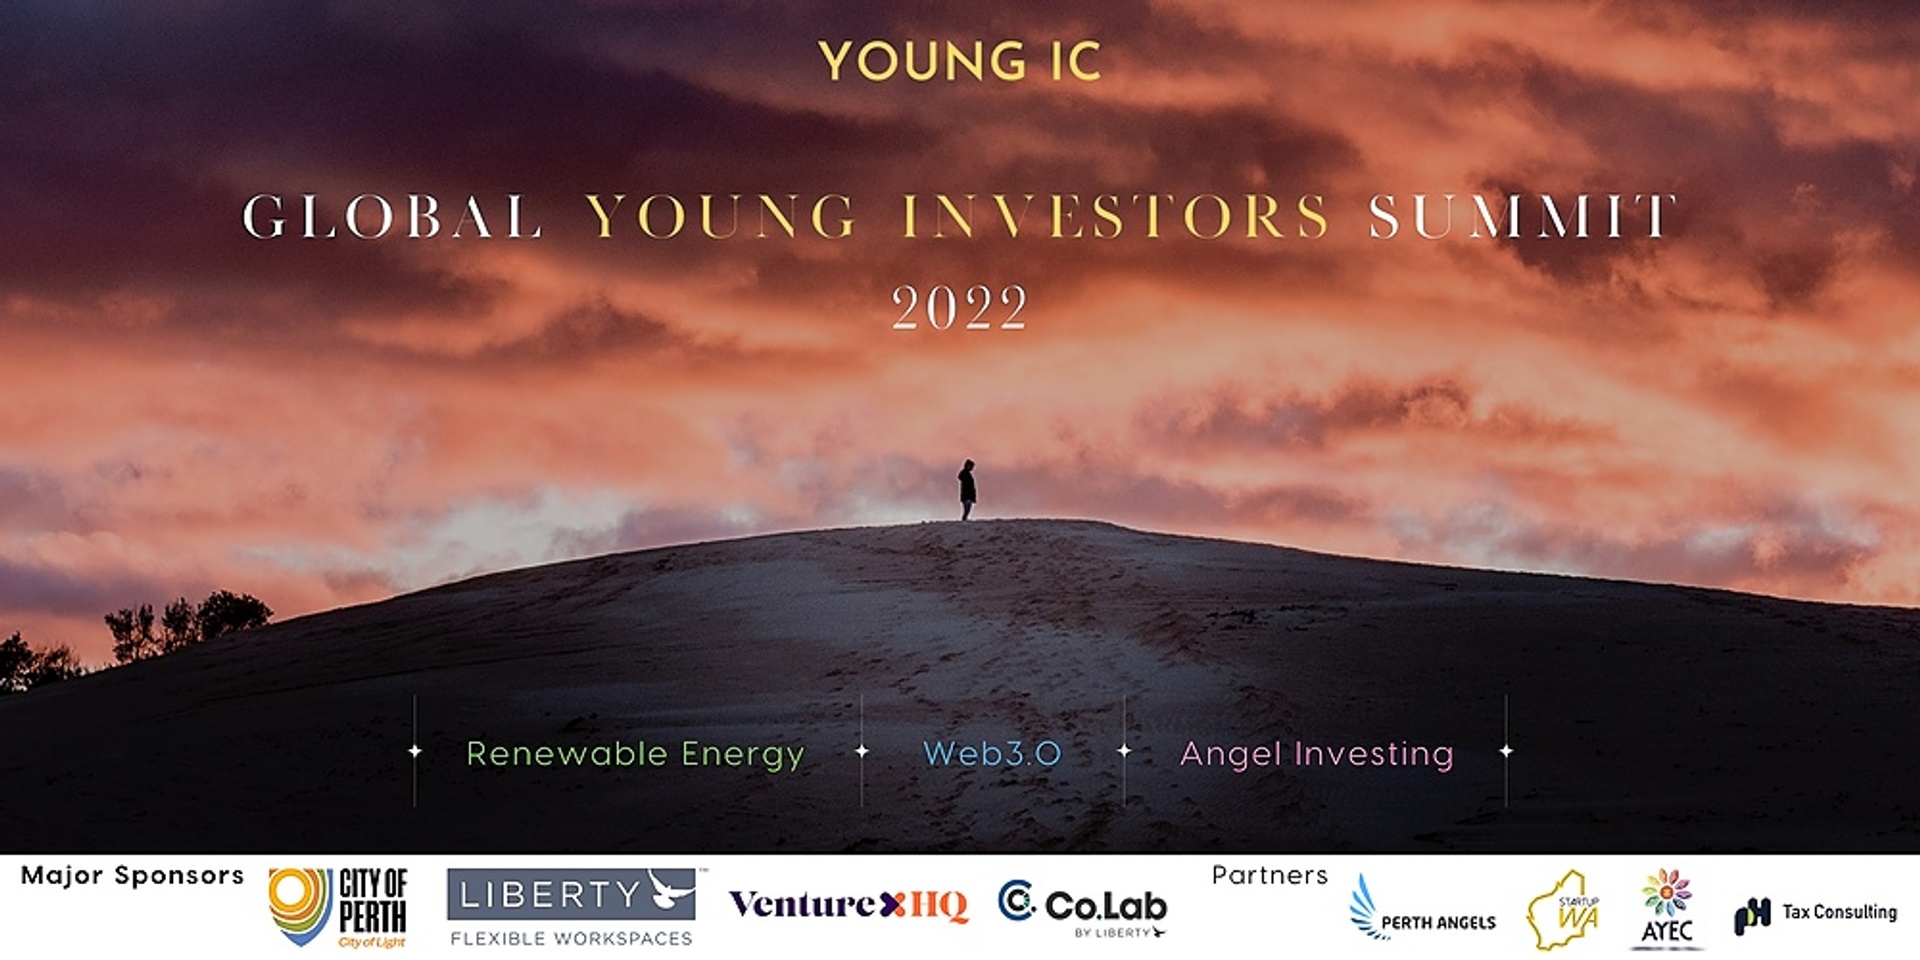 Global Young Investors Summit 2022